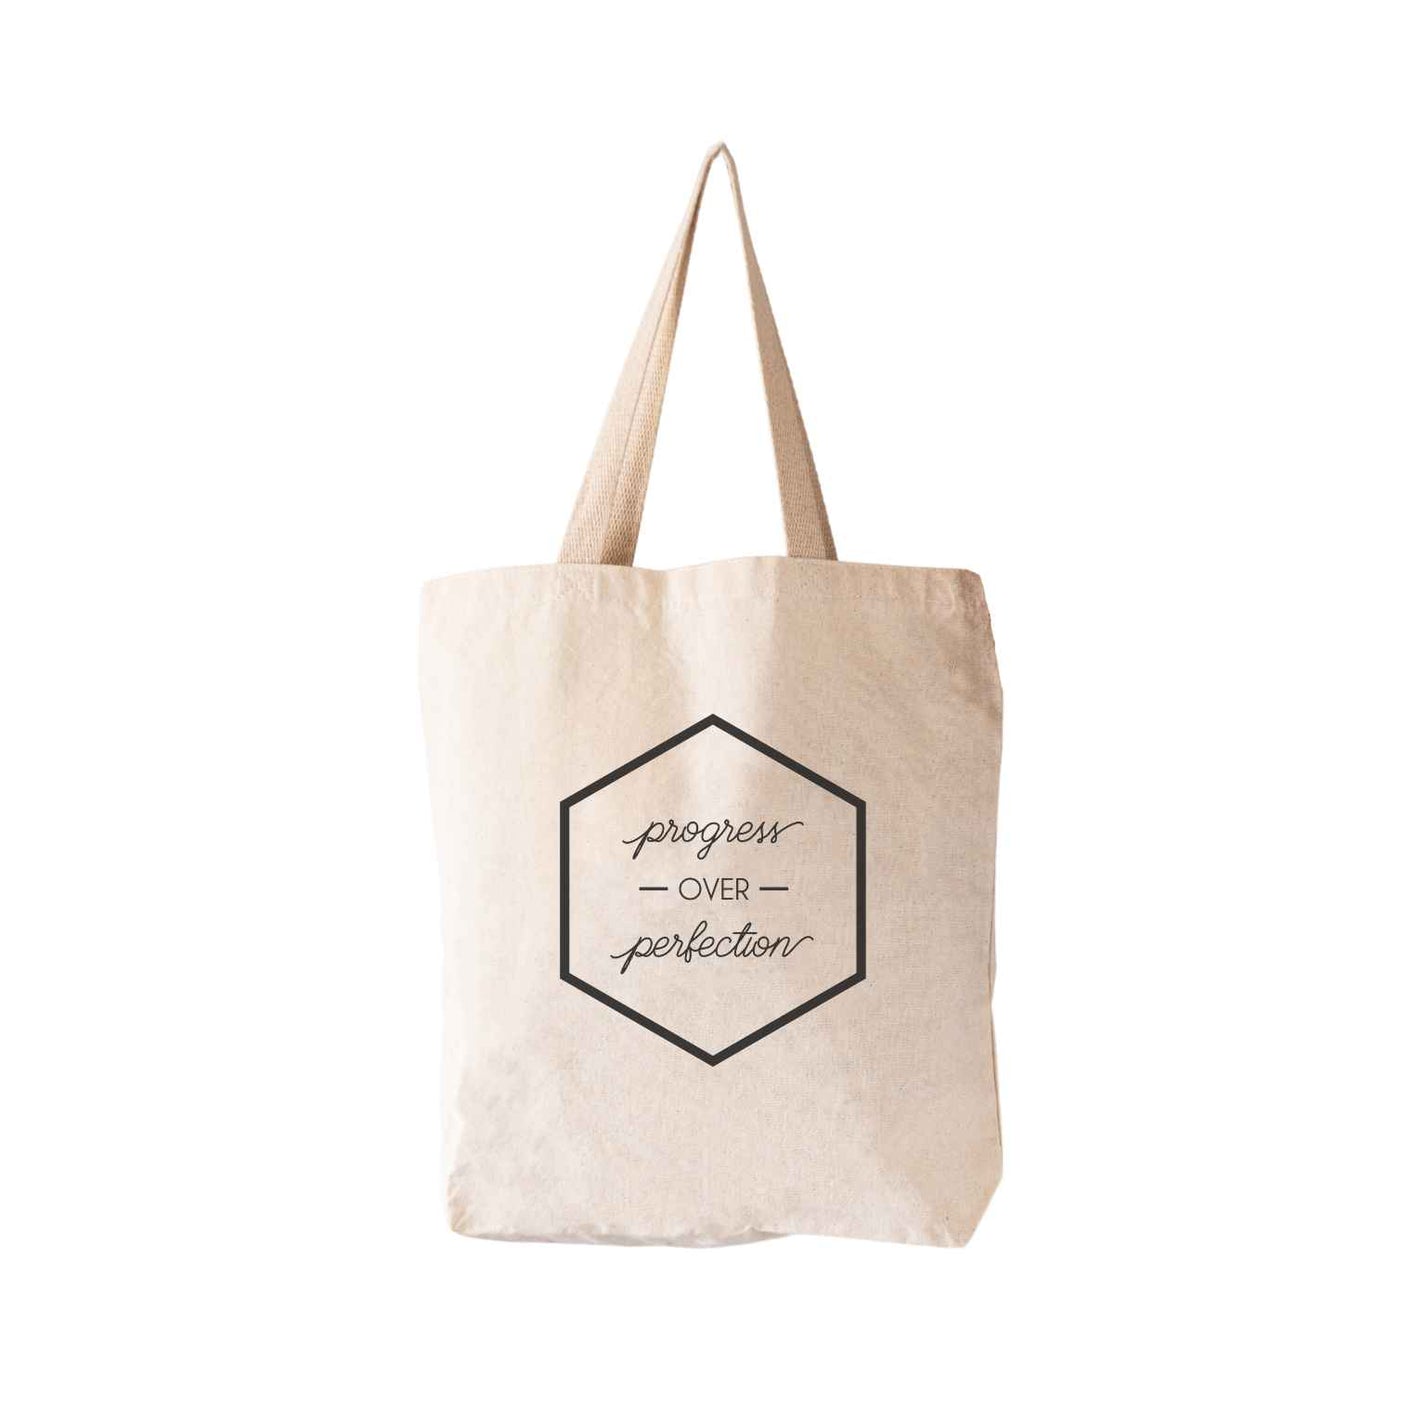 Progress Over Perfection Tote Bag